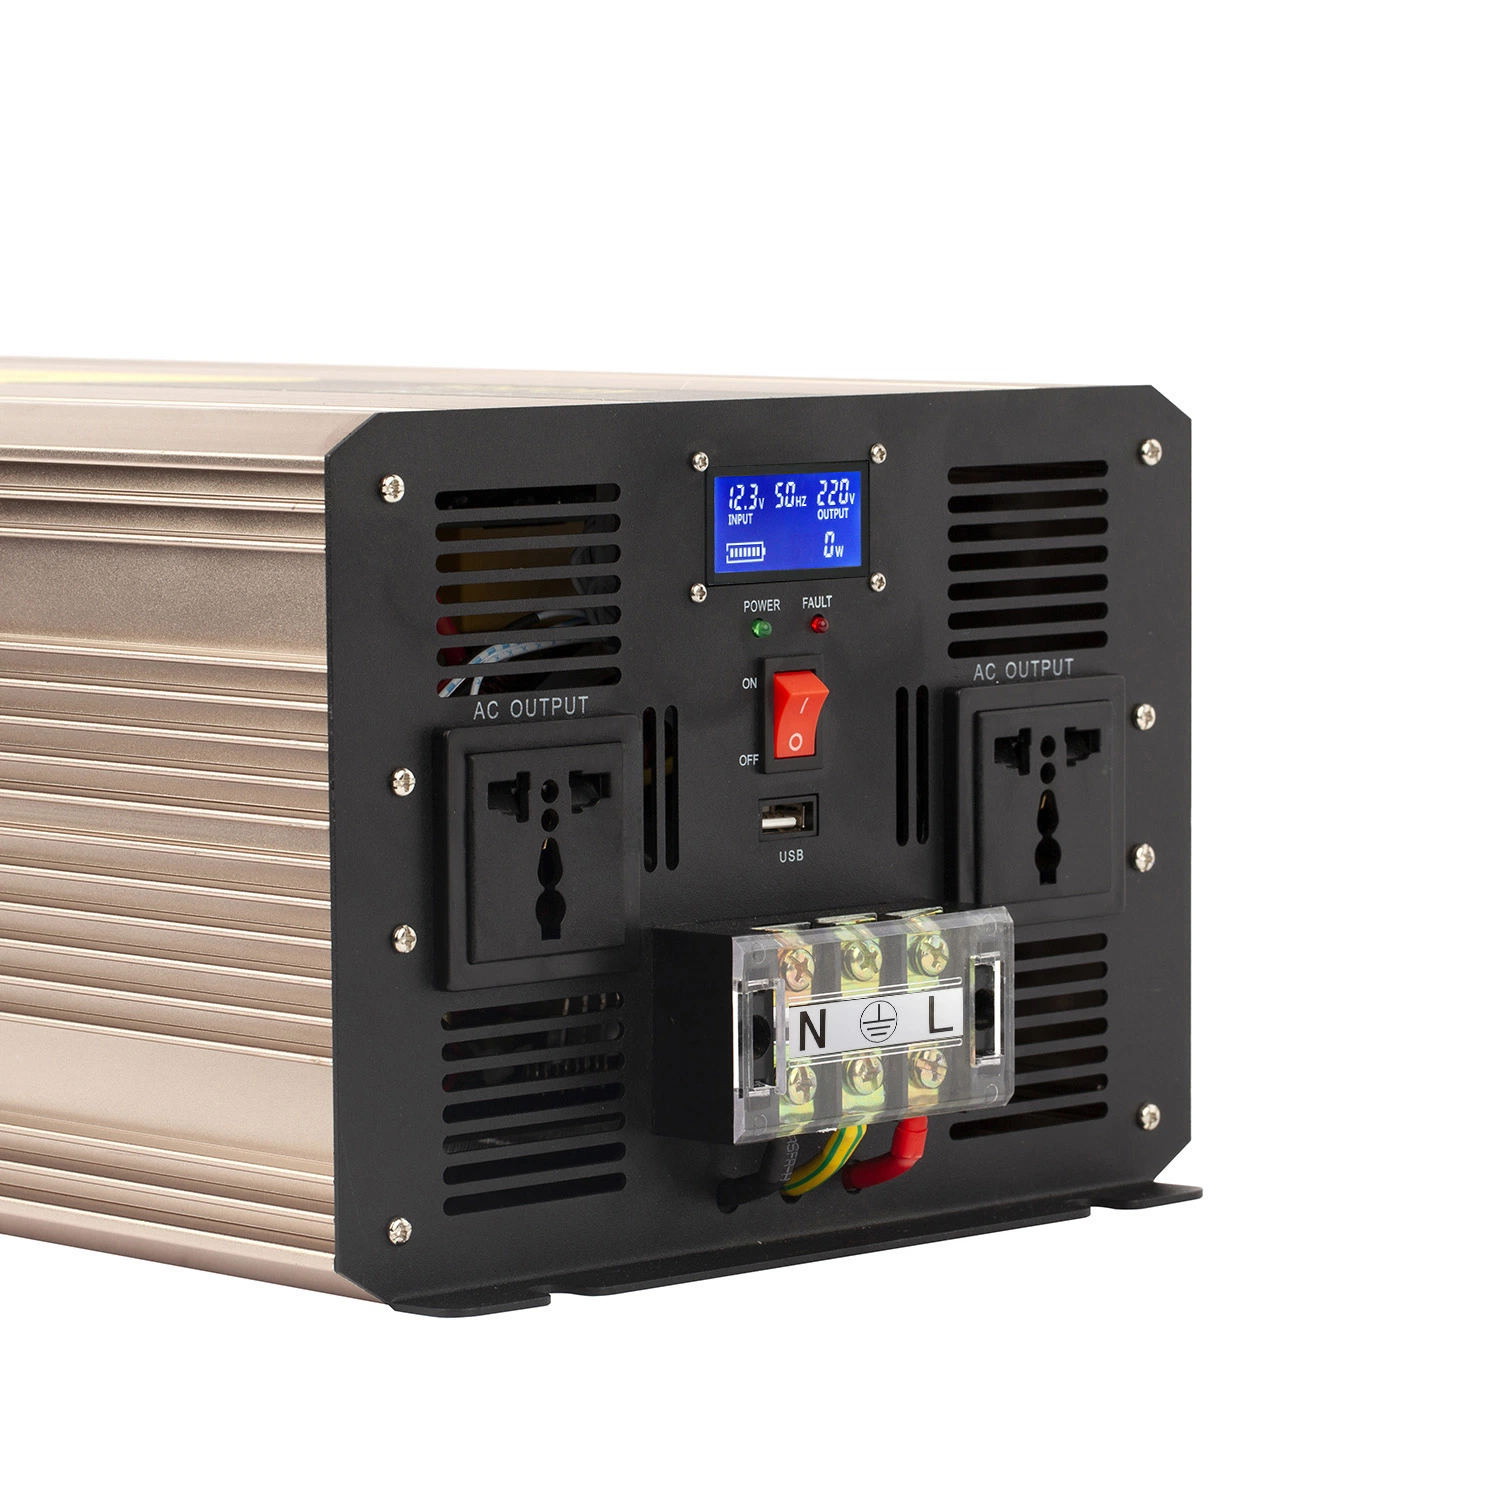 Ce RoHS FCC Approved 6000W Pure Sine Wave Power Inverter for Home Office